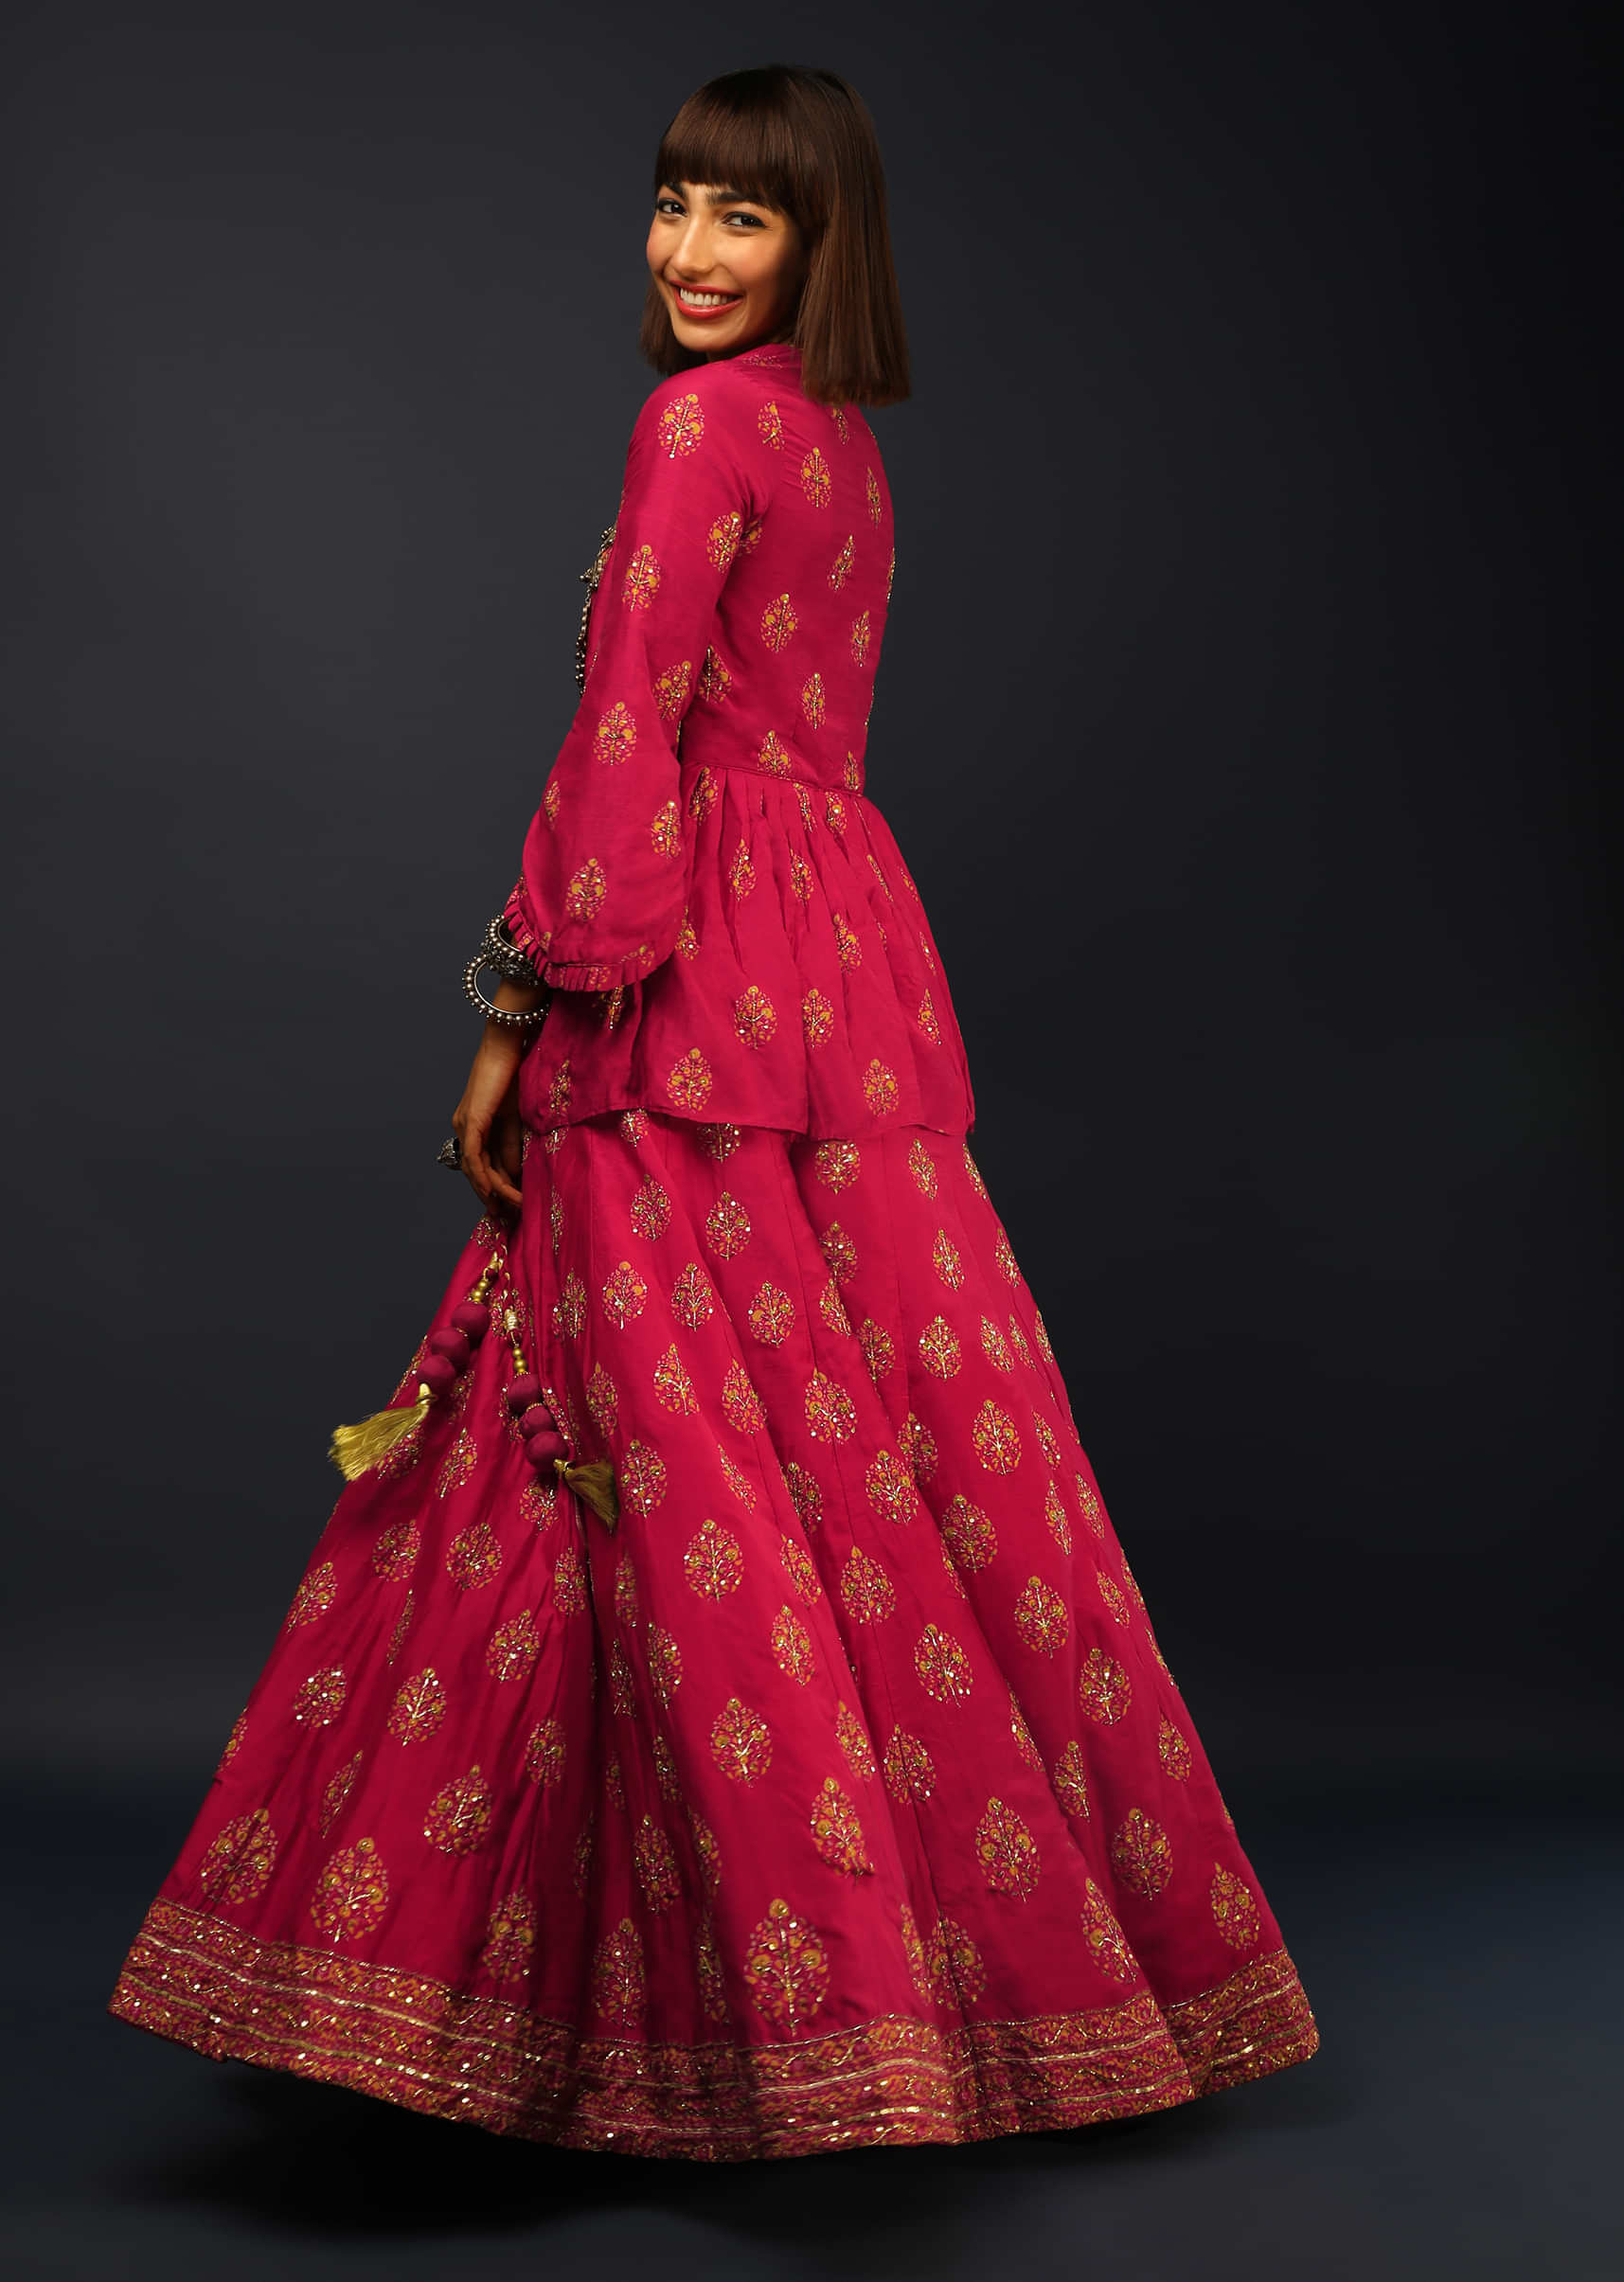 Barberry Red Lehenga In Silk With Printed Leaf Shaped Buttis And Peplum Top 